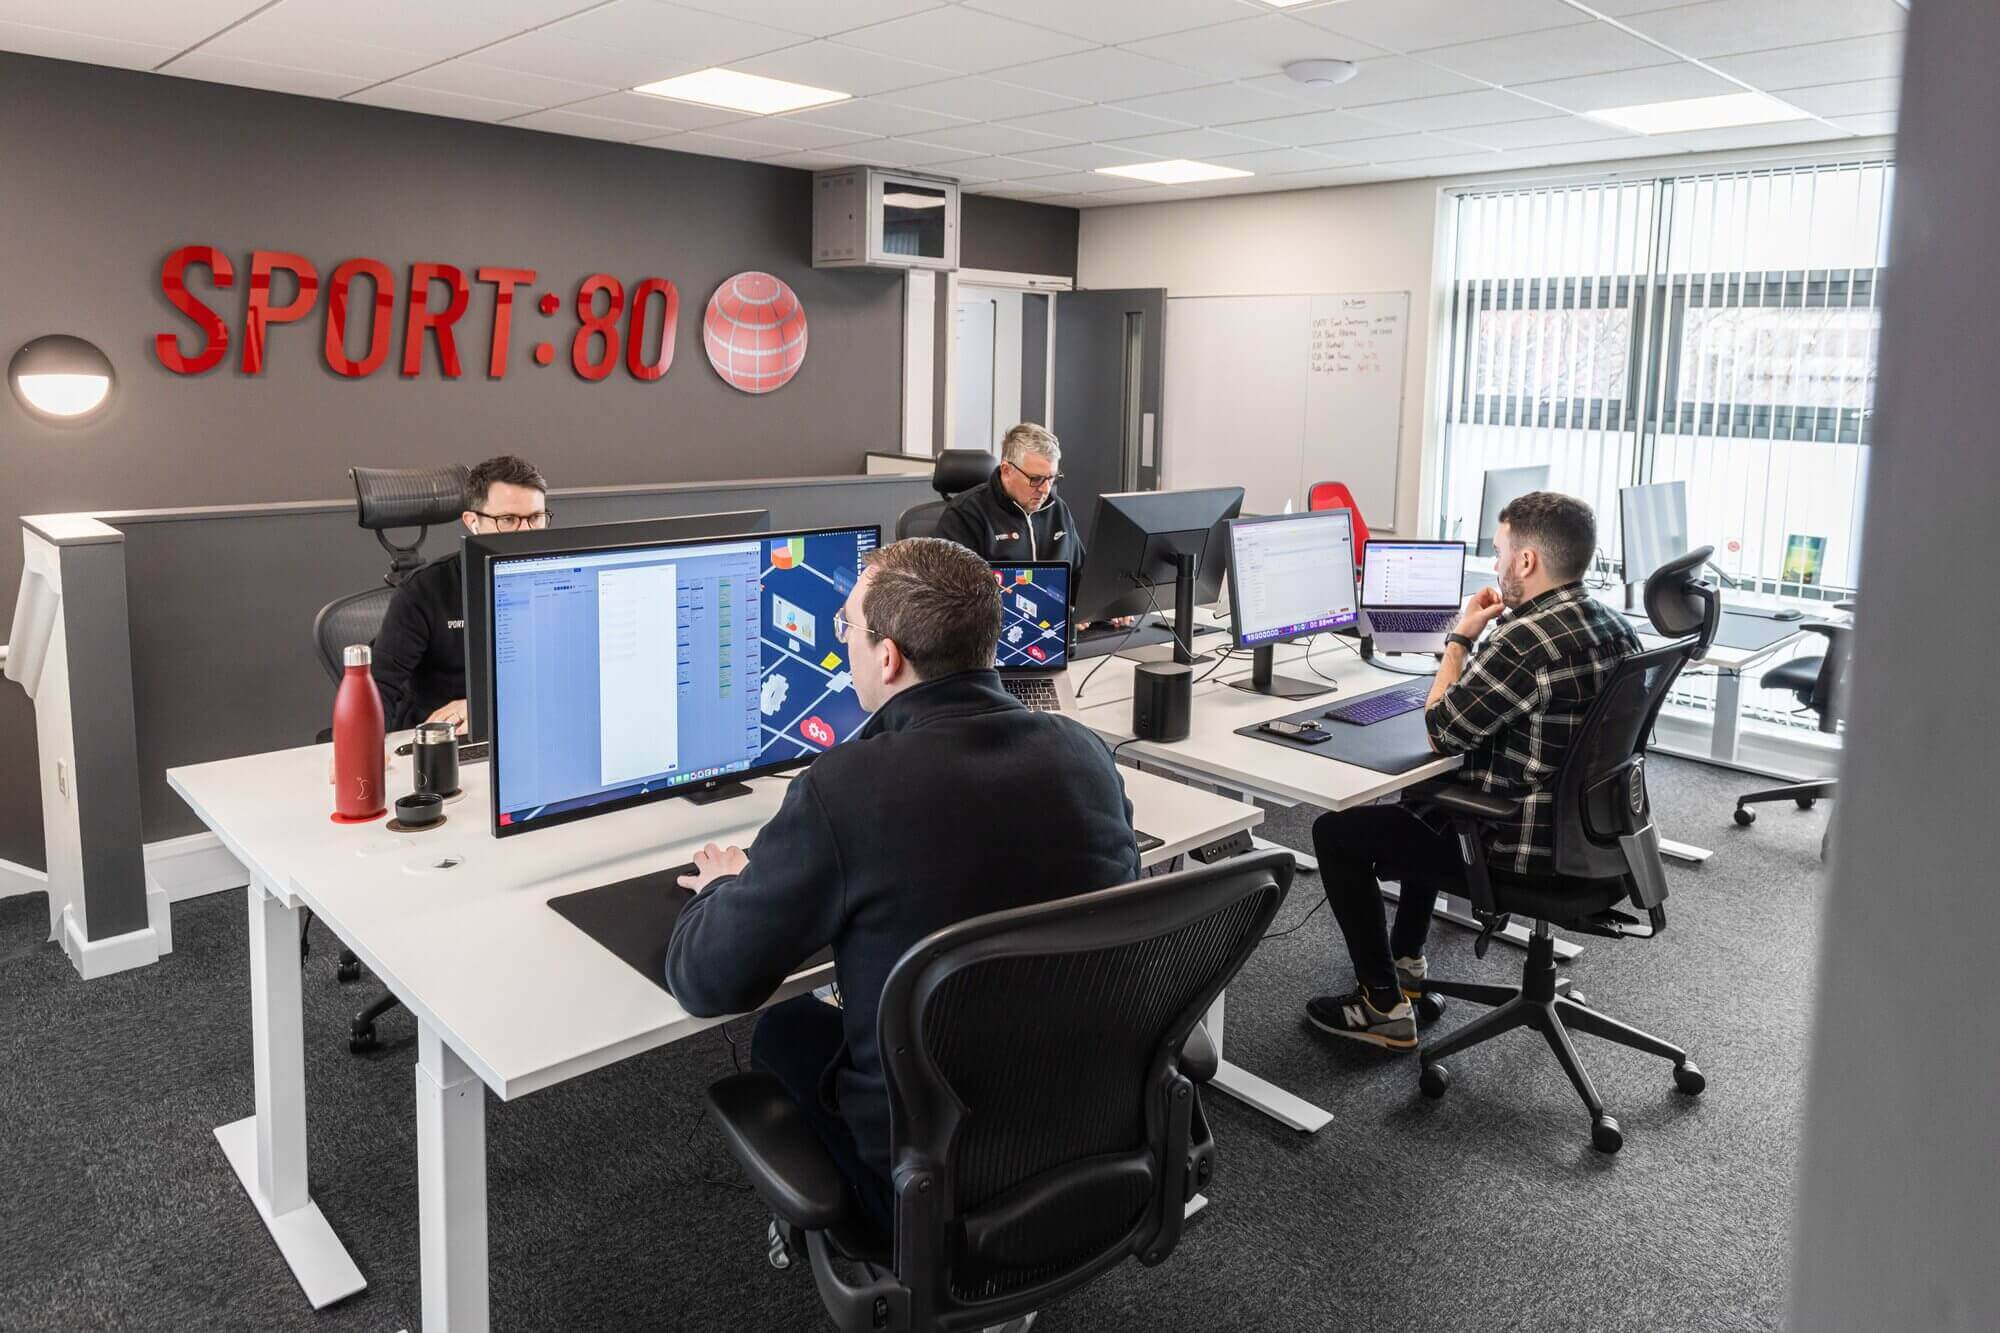 Sport:80 achieve internationally recognised information security accreditation ISO 27001